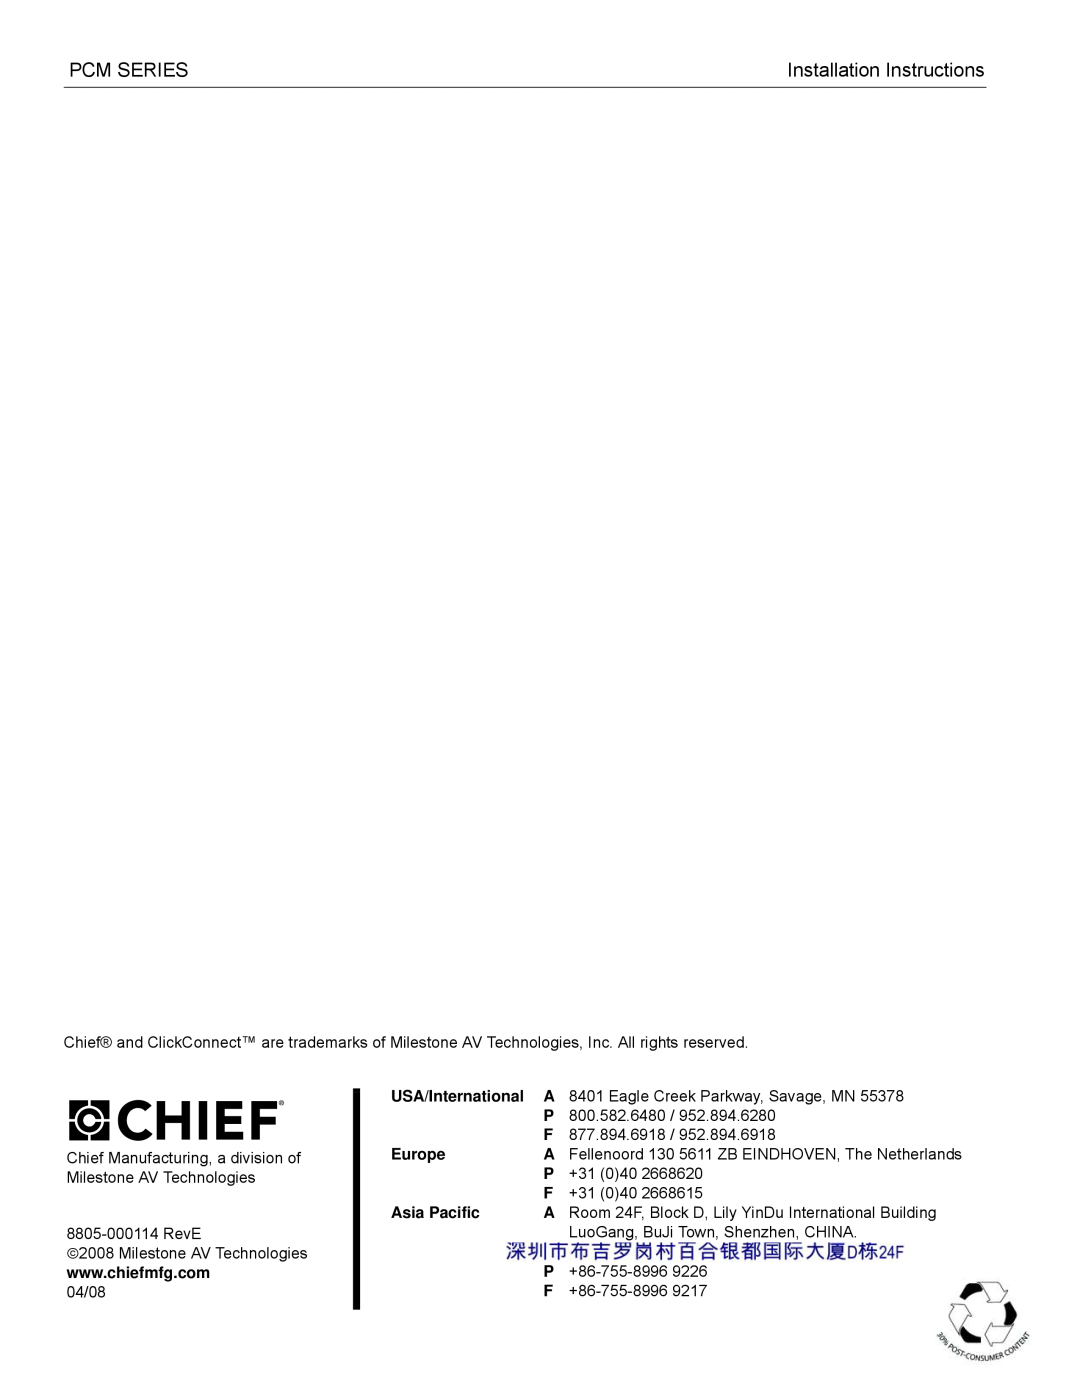 Chief Manufacturing PCM Series installation instructions Pcm Series, Installation Instructions, RevE, 04/08 